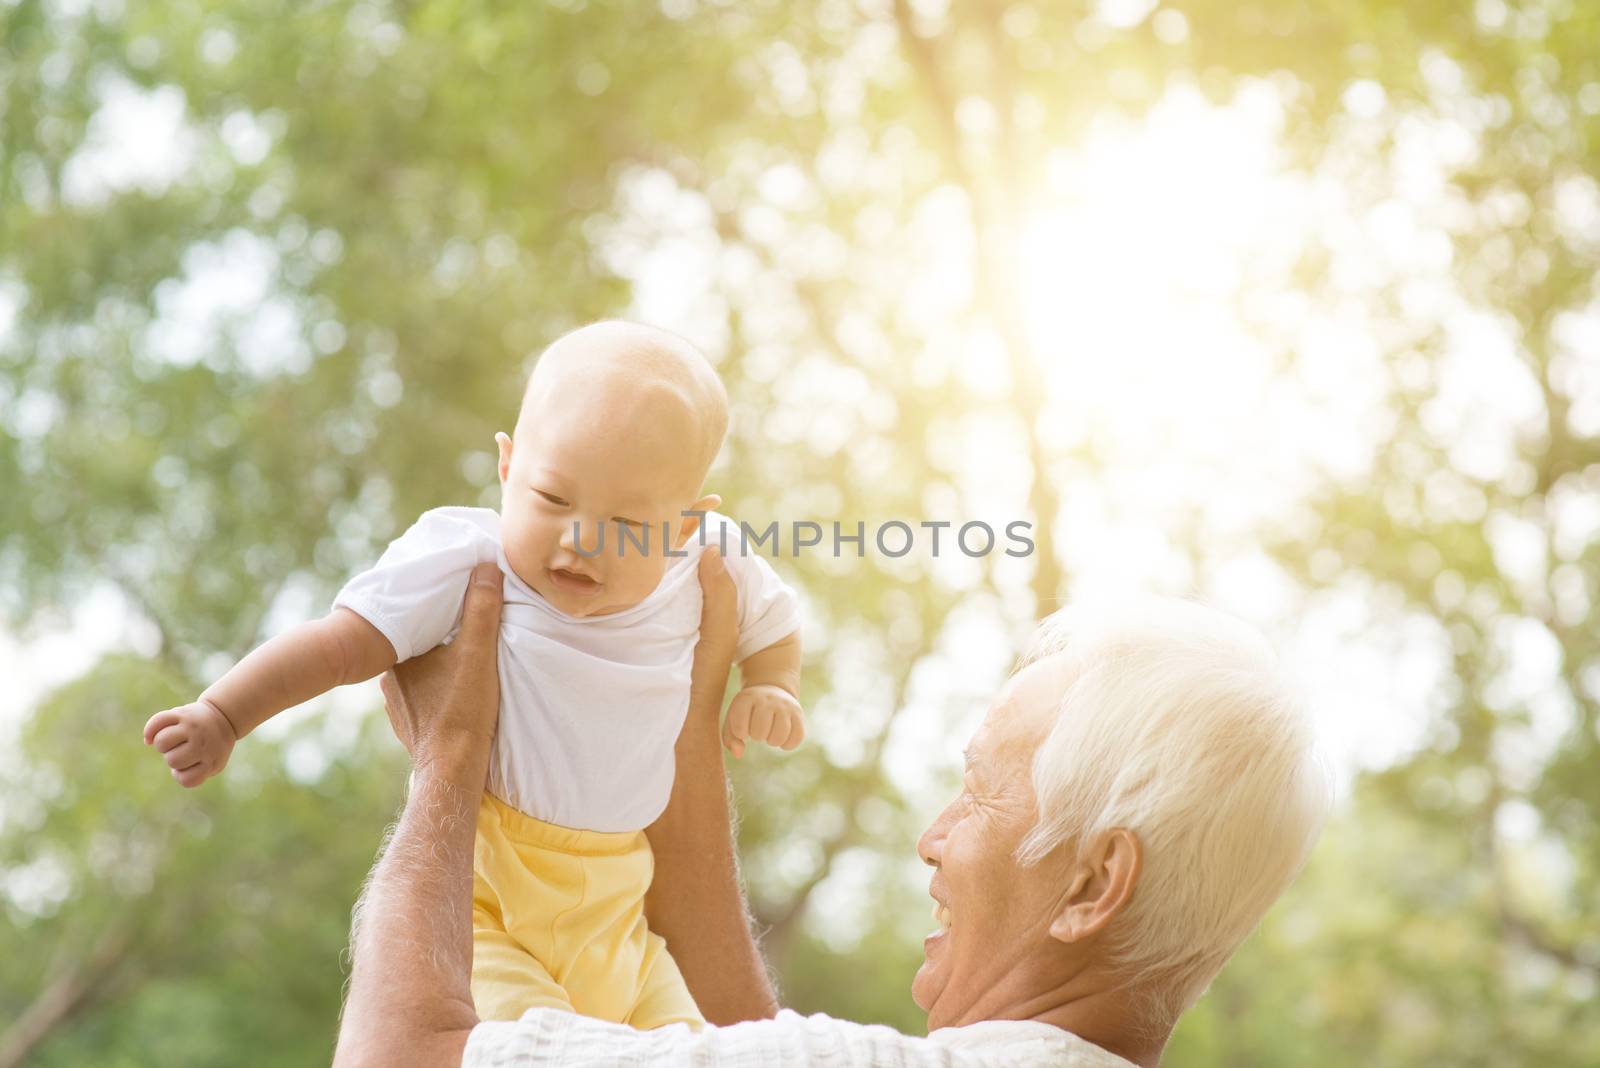 Grandfather carrying baby grandson at outdoor park, Asian family.